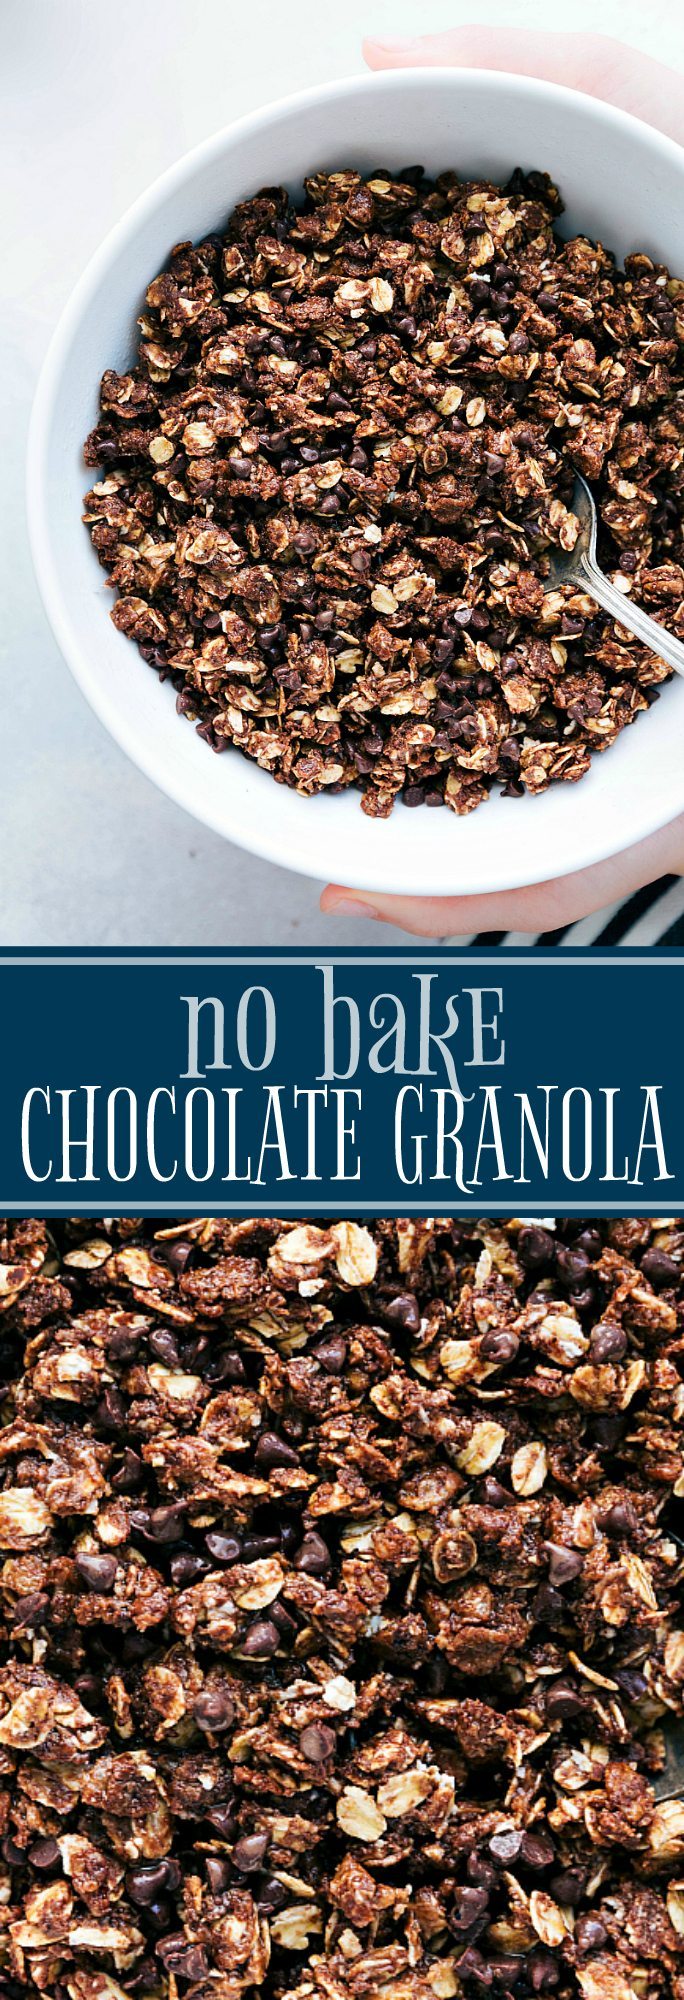 The ultimate BEST EVER no baking required chocolate granola! An easy healthy snack that takes less than 10 minutes to prepare! via chelseasmessyapron.com #chocolate #granola #easy #quick #snack #healthy #kidfriendly #nobake